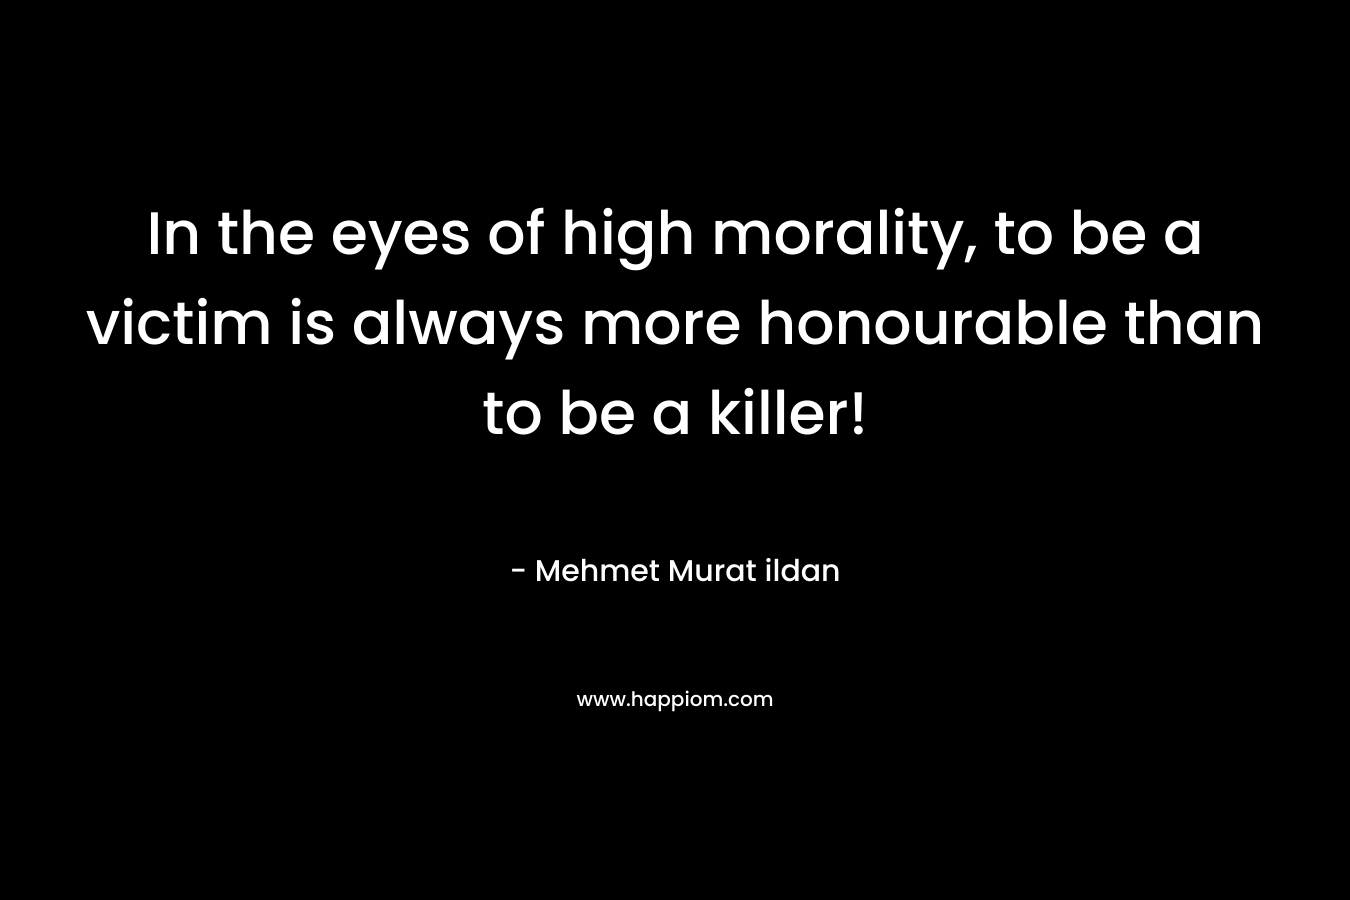 In the eyes of high morality, to be a victim is always more honourable than to be a killer!